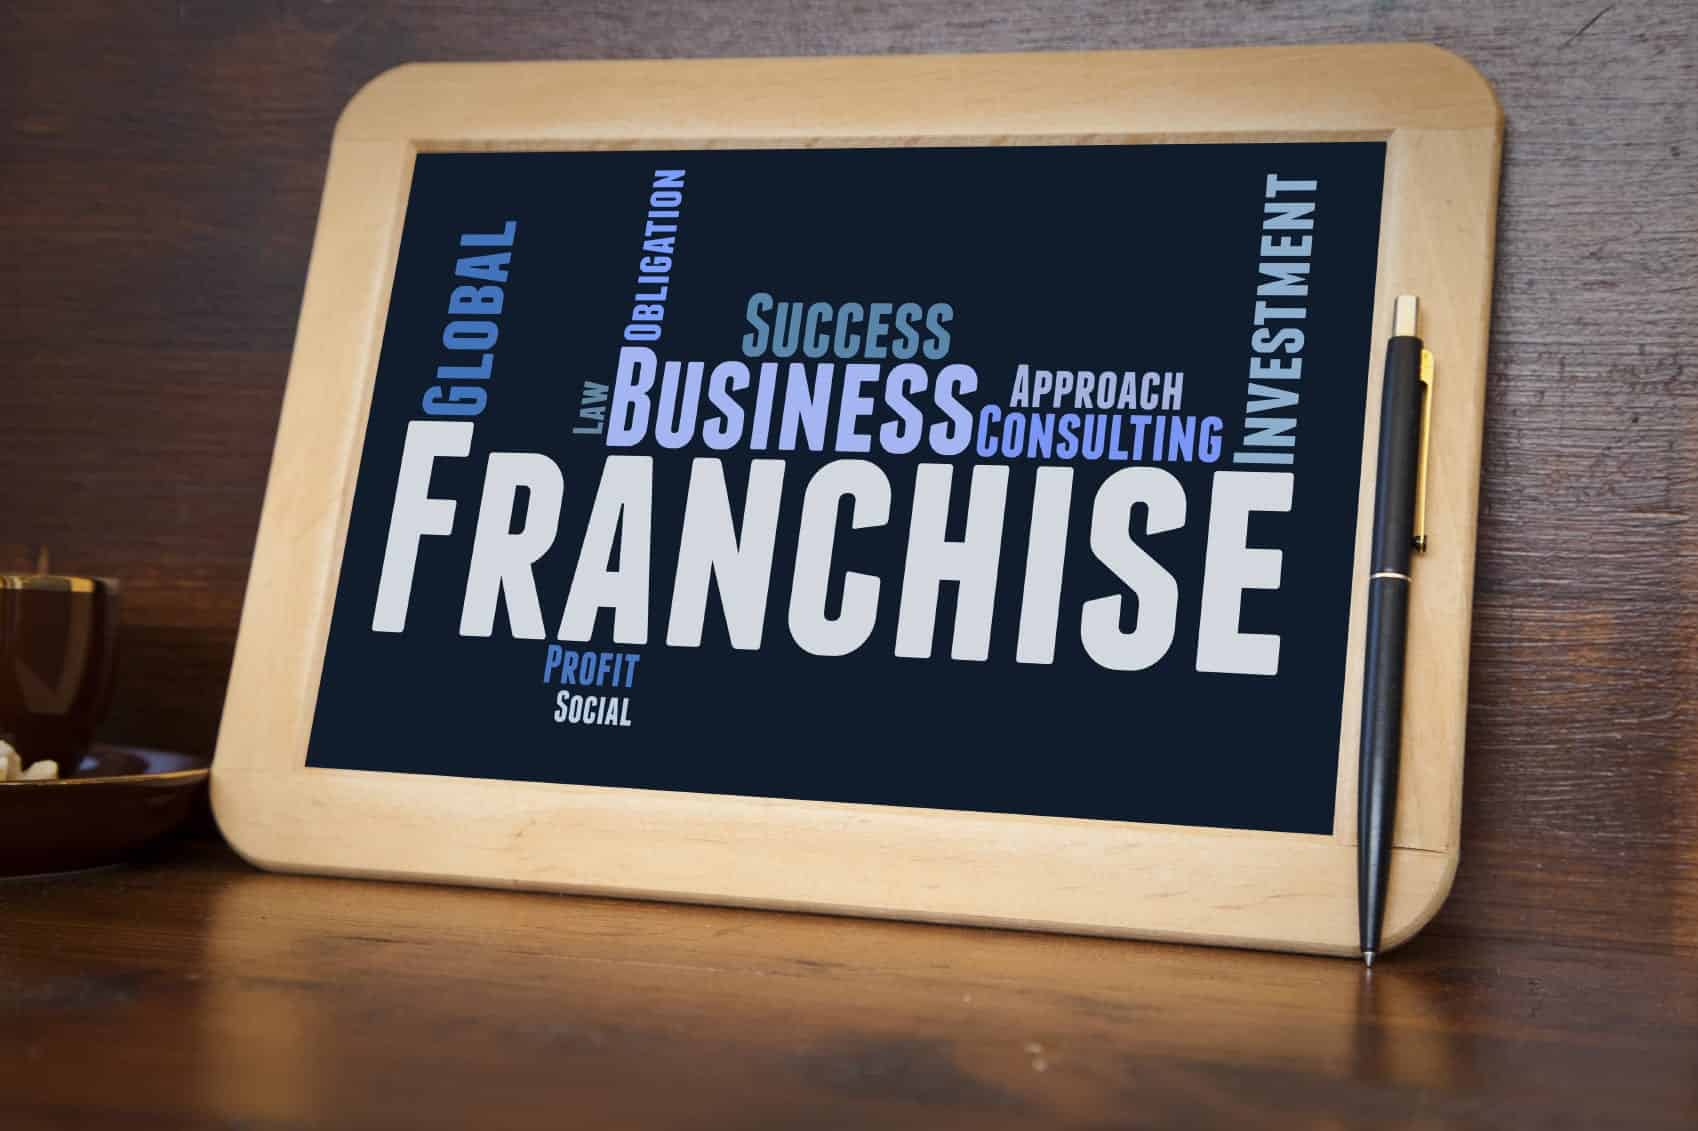 3 Things You Need to Jump from Small Business to Franchise